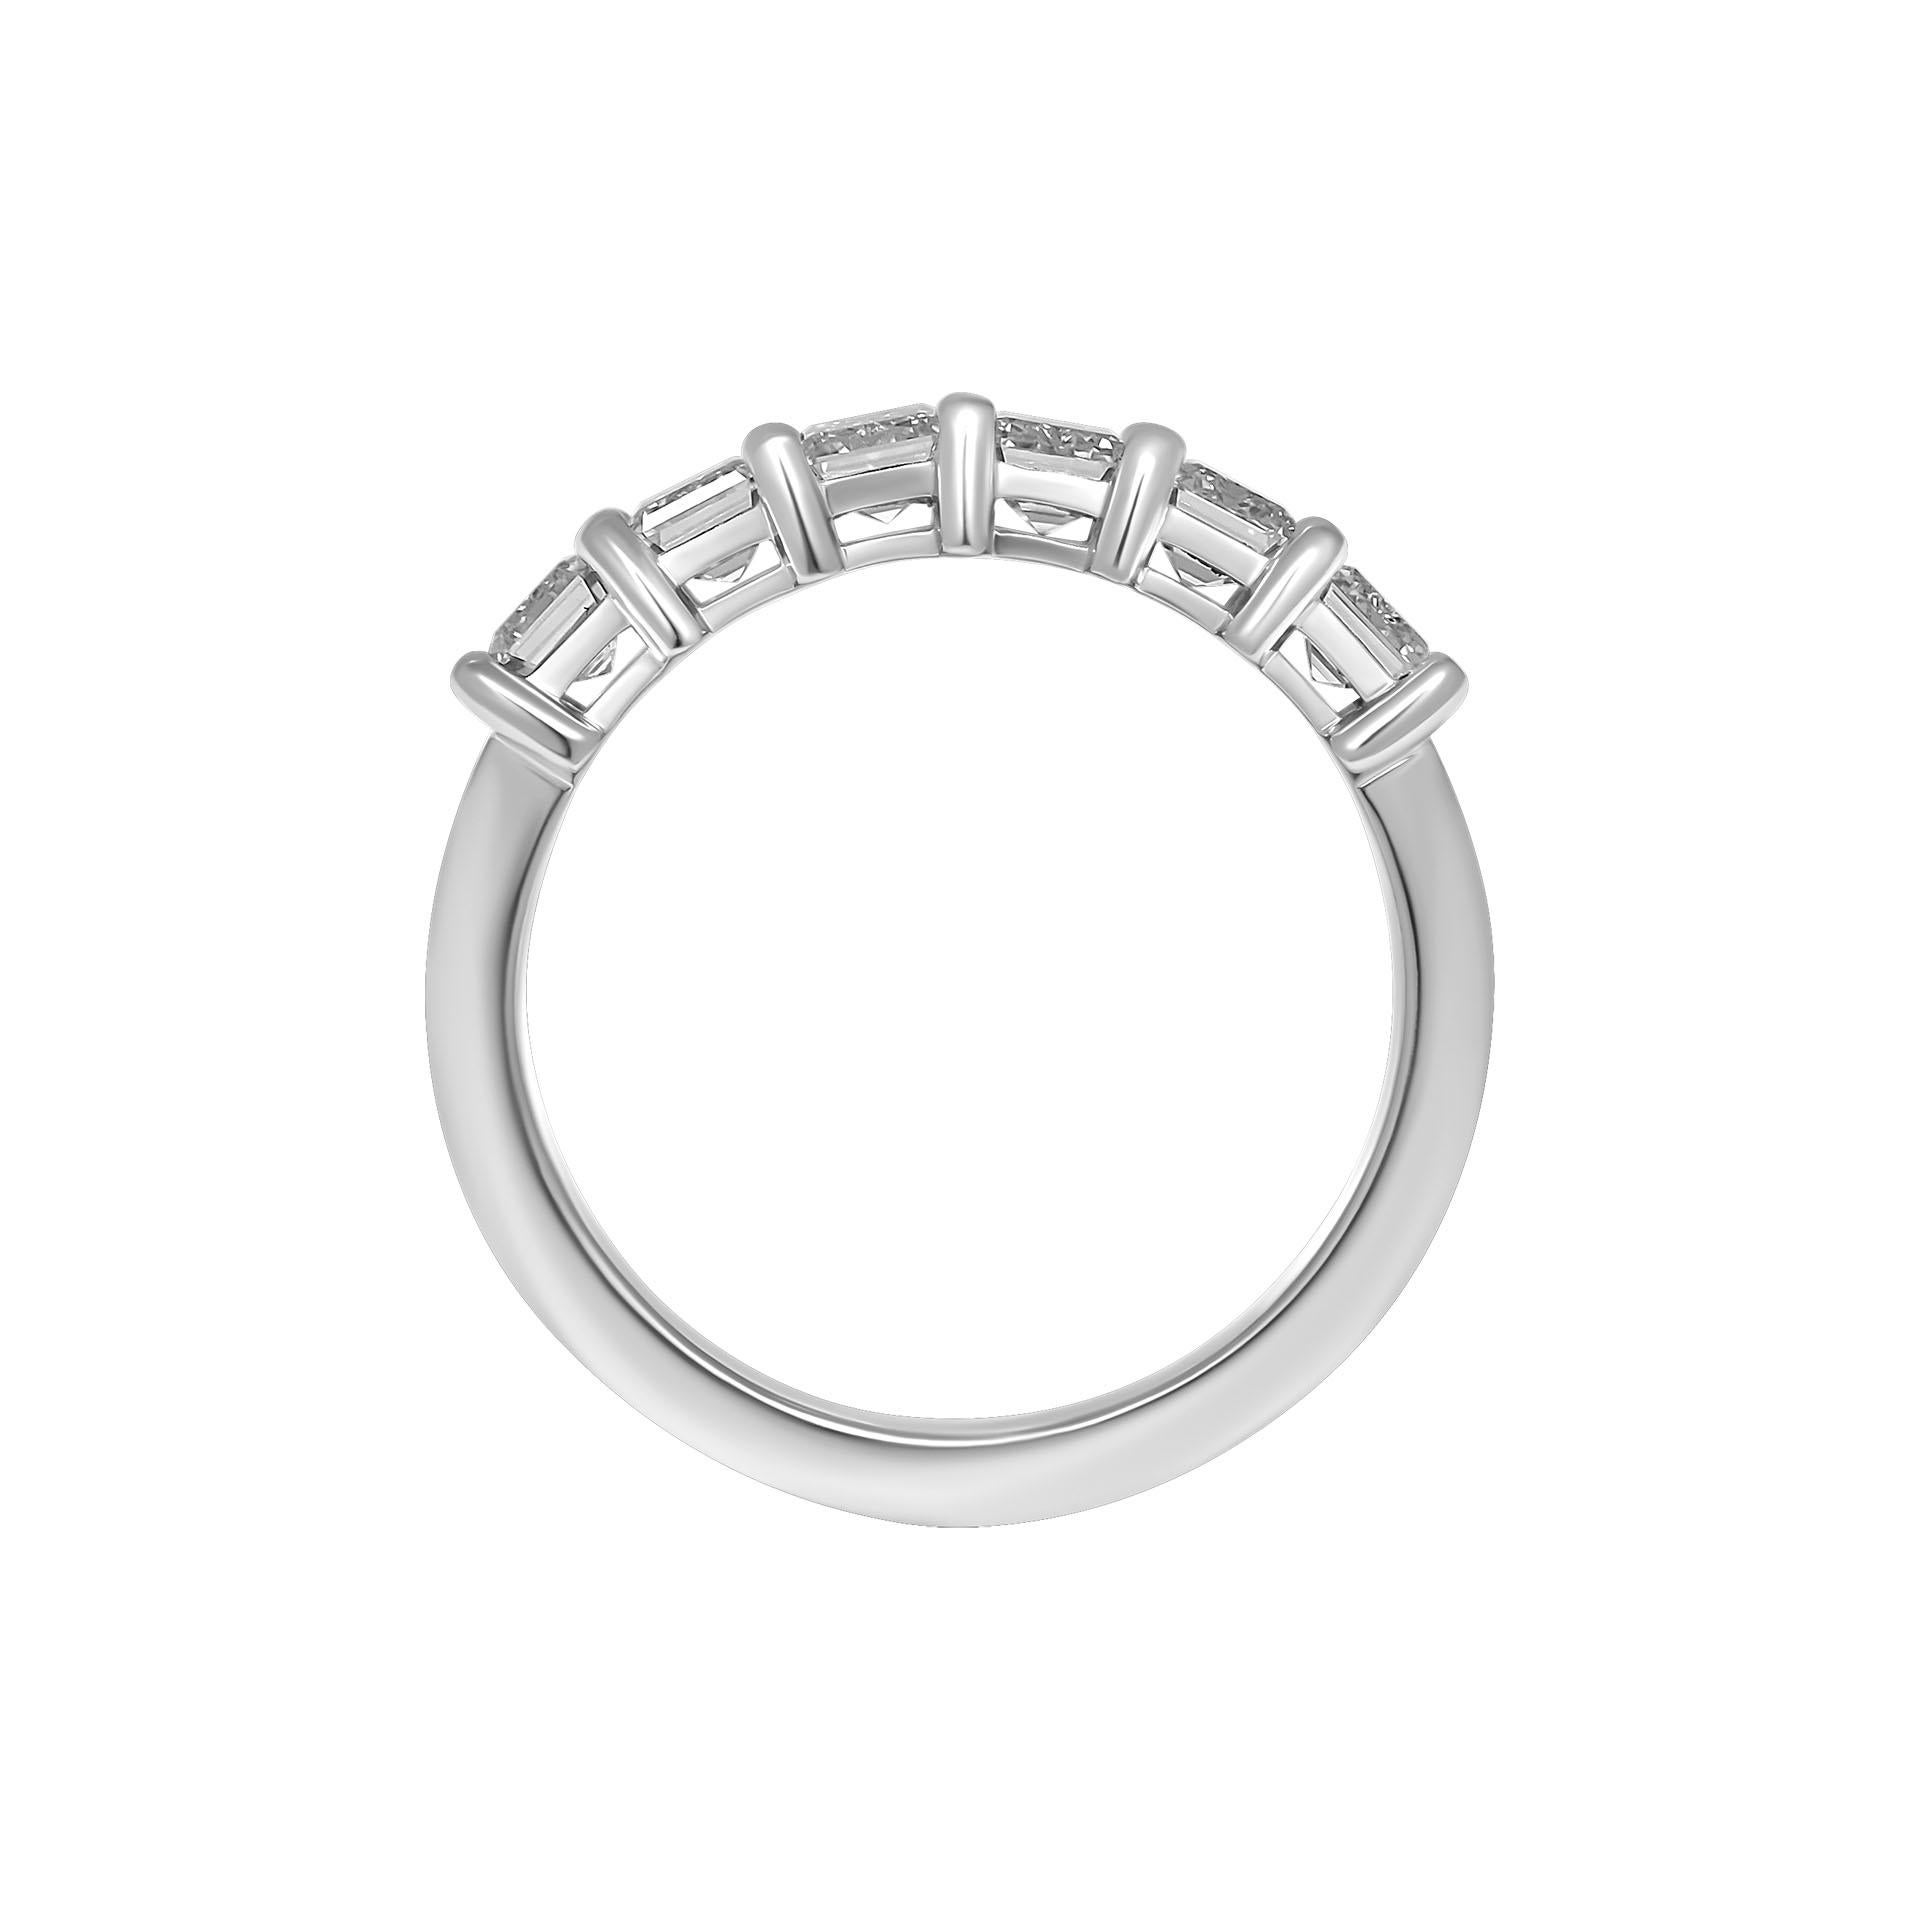 Modern 6 Stone GIA Certified Emerald Cut Diamonds 0.30 Ct Each Ring in Platinum For Sale